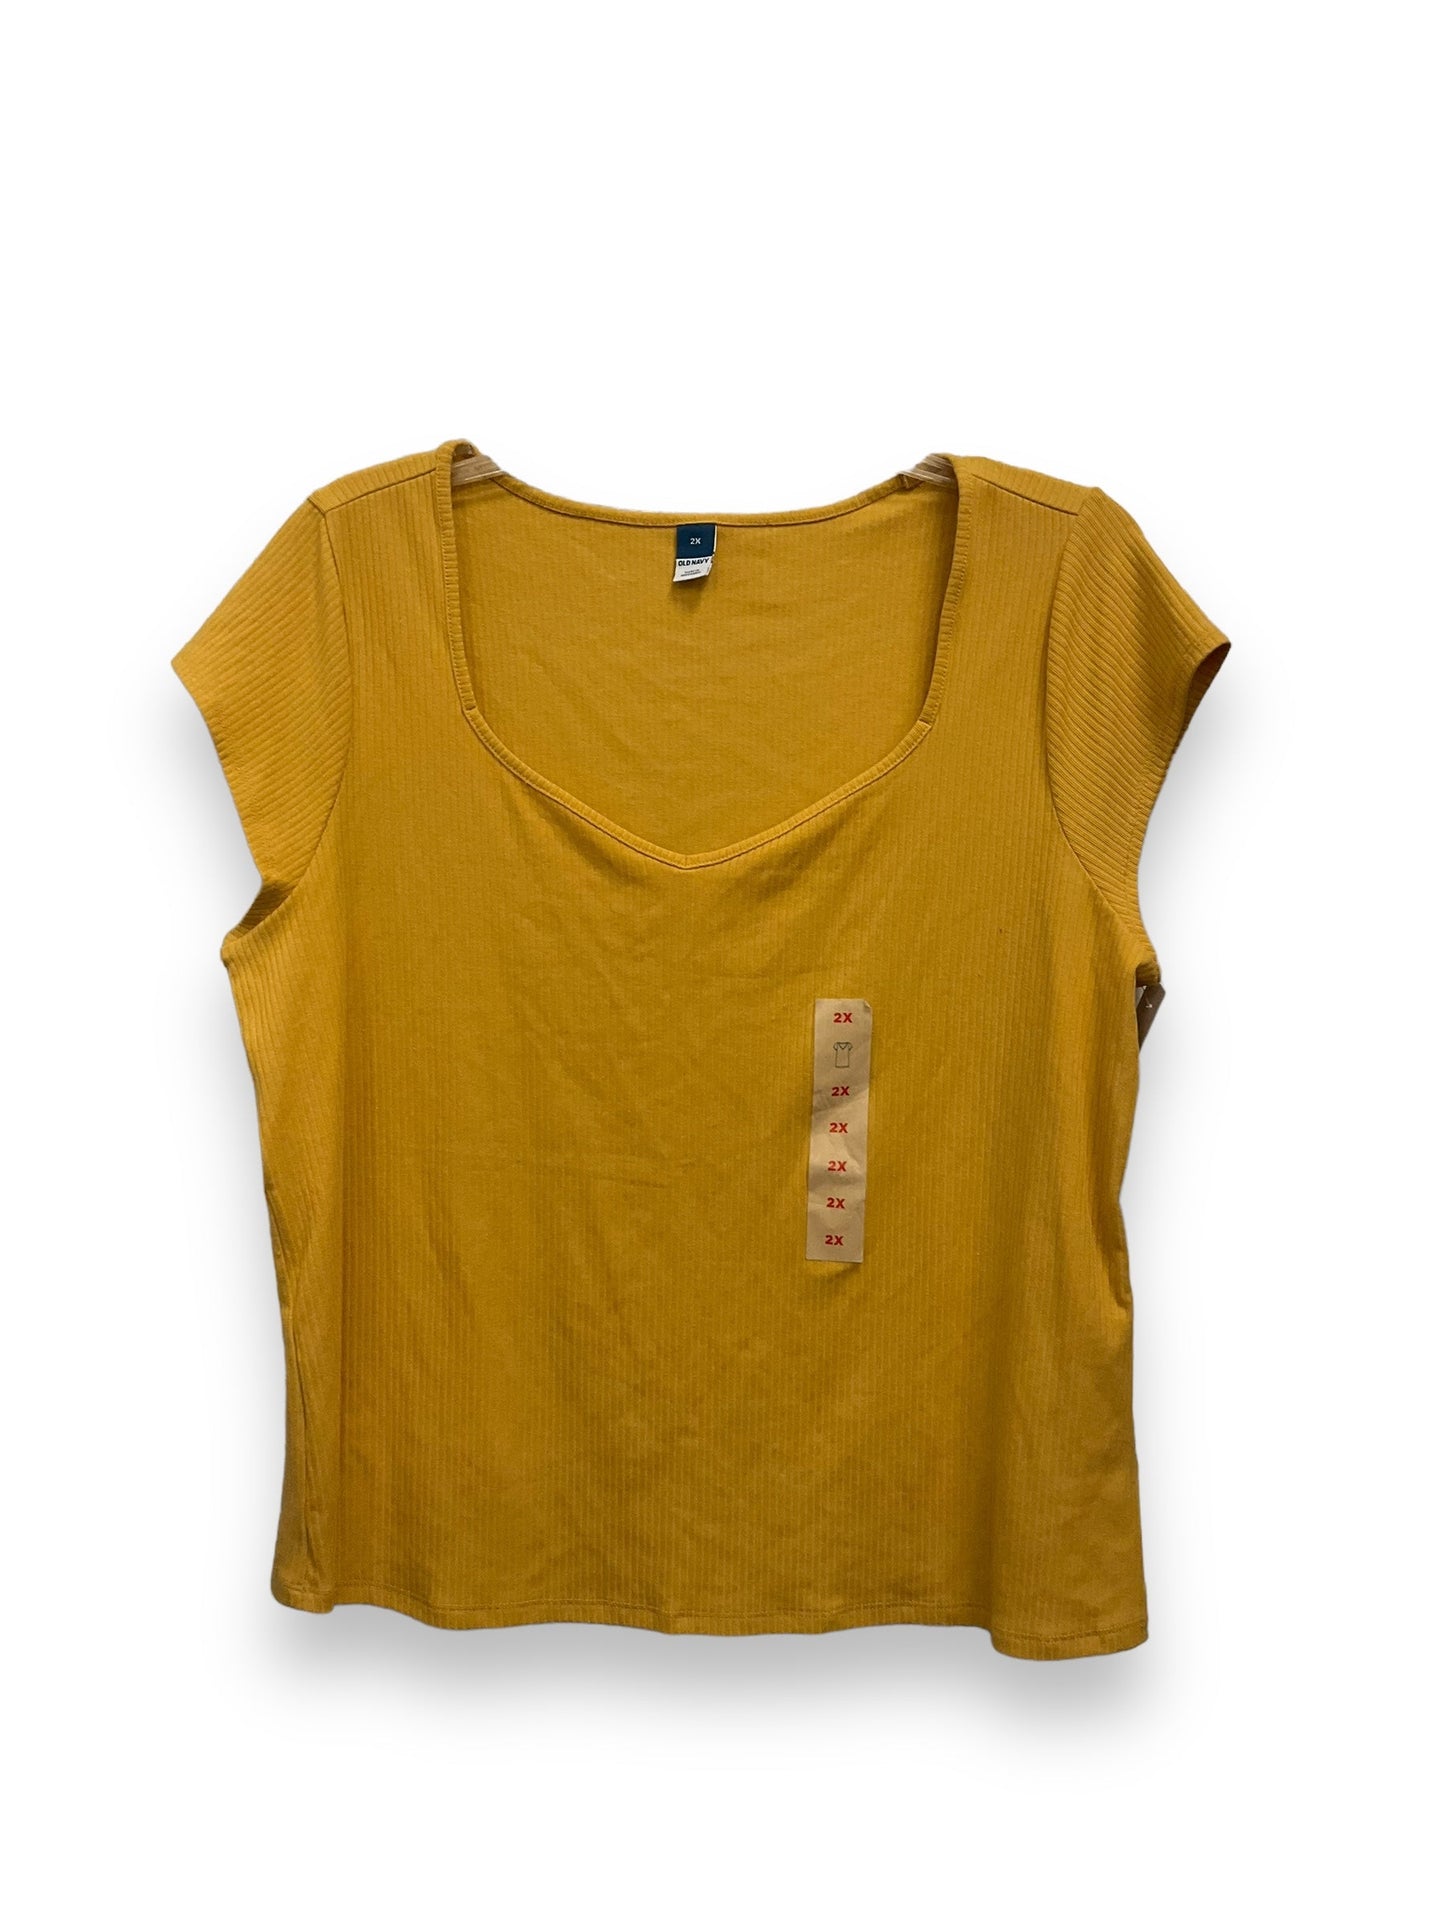 Yellow Top Short Sleeve Old Navy, Size 2x